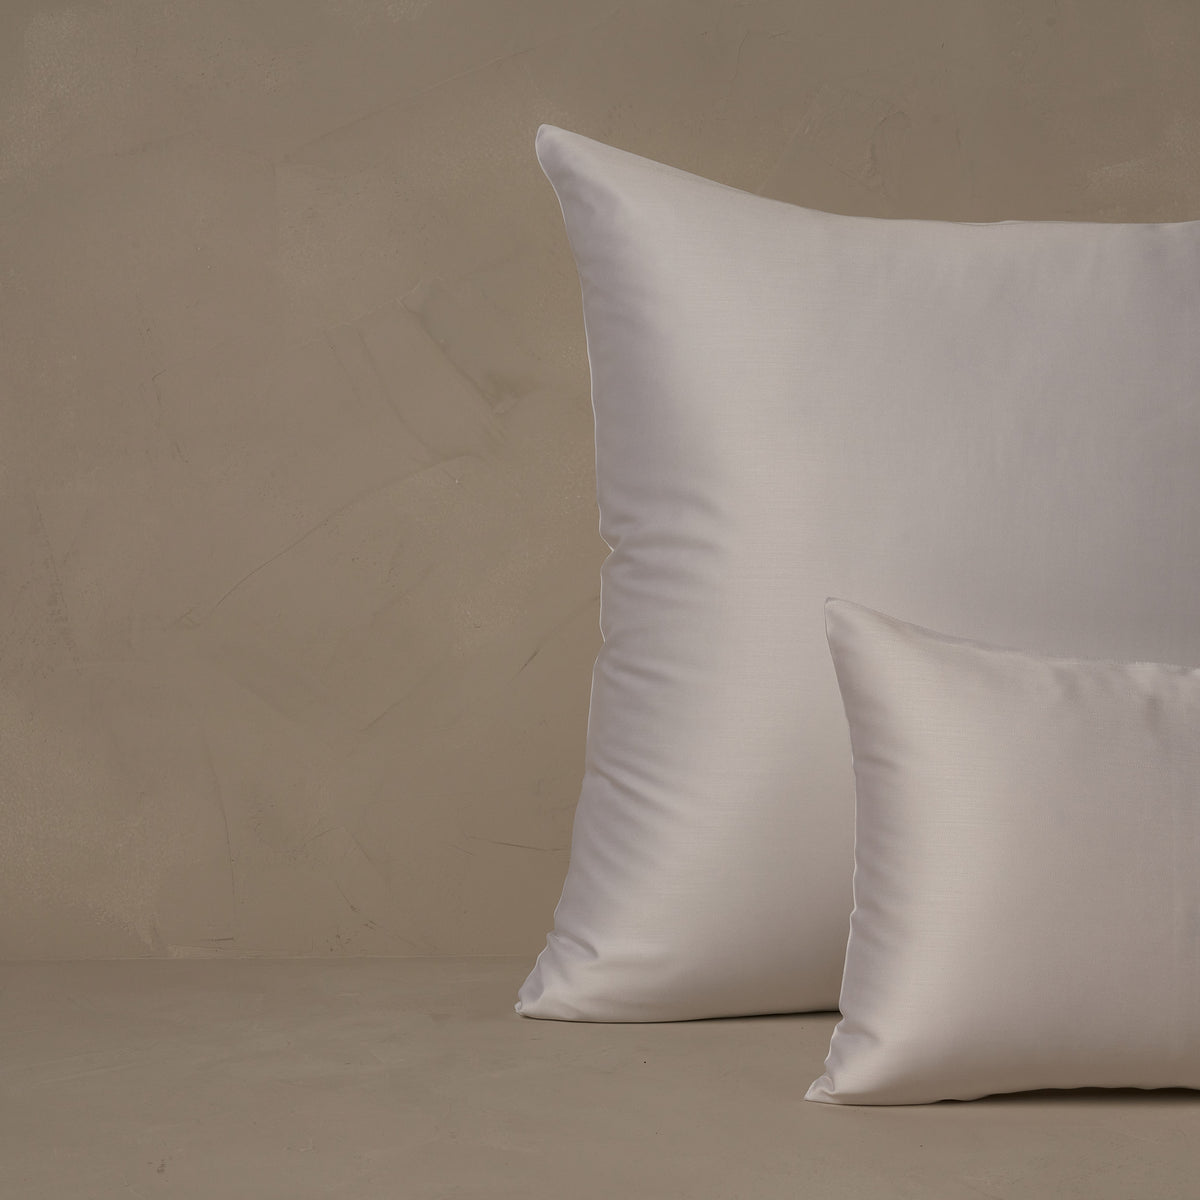 An image of a small boudoir or travel size pillow stacked in front of a large euro size pillow. The pillow cases are made in Italy of LETTO Woodland Silk fabric in color white, a smooth and silky beechwood modal. data-image-id=